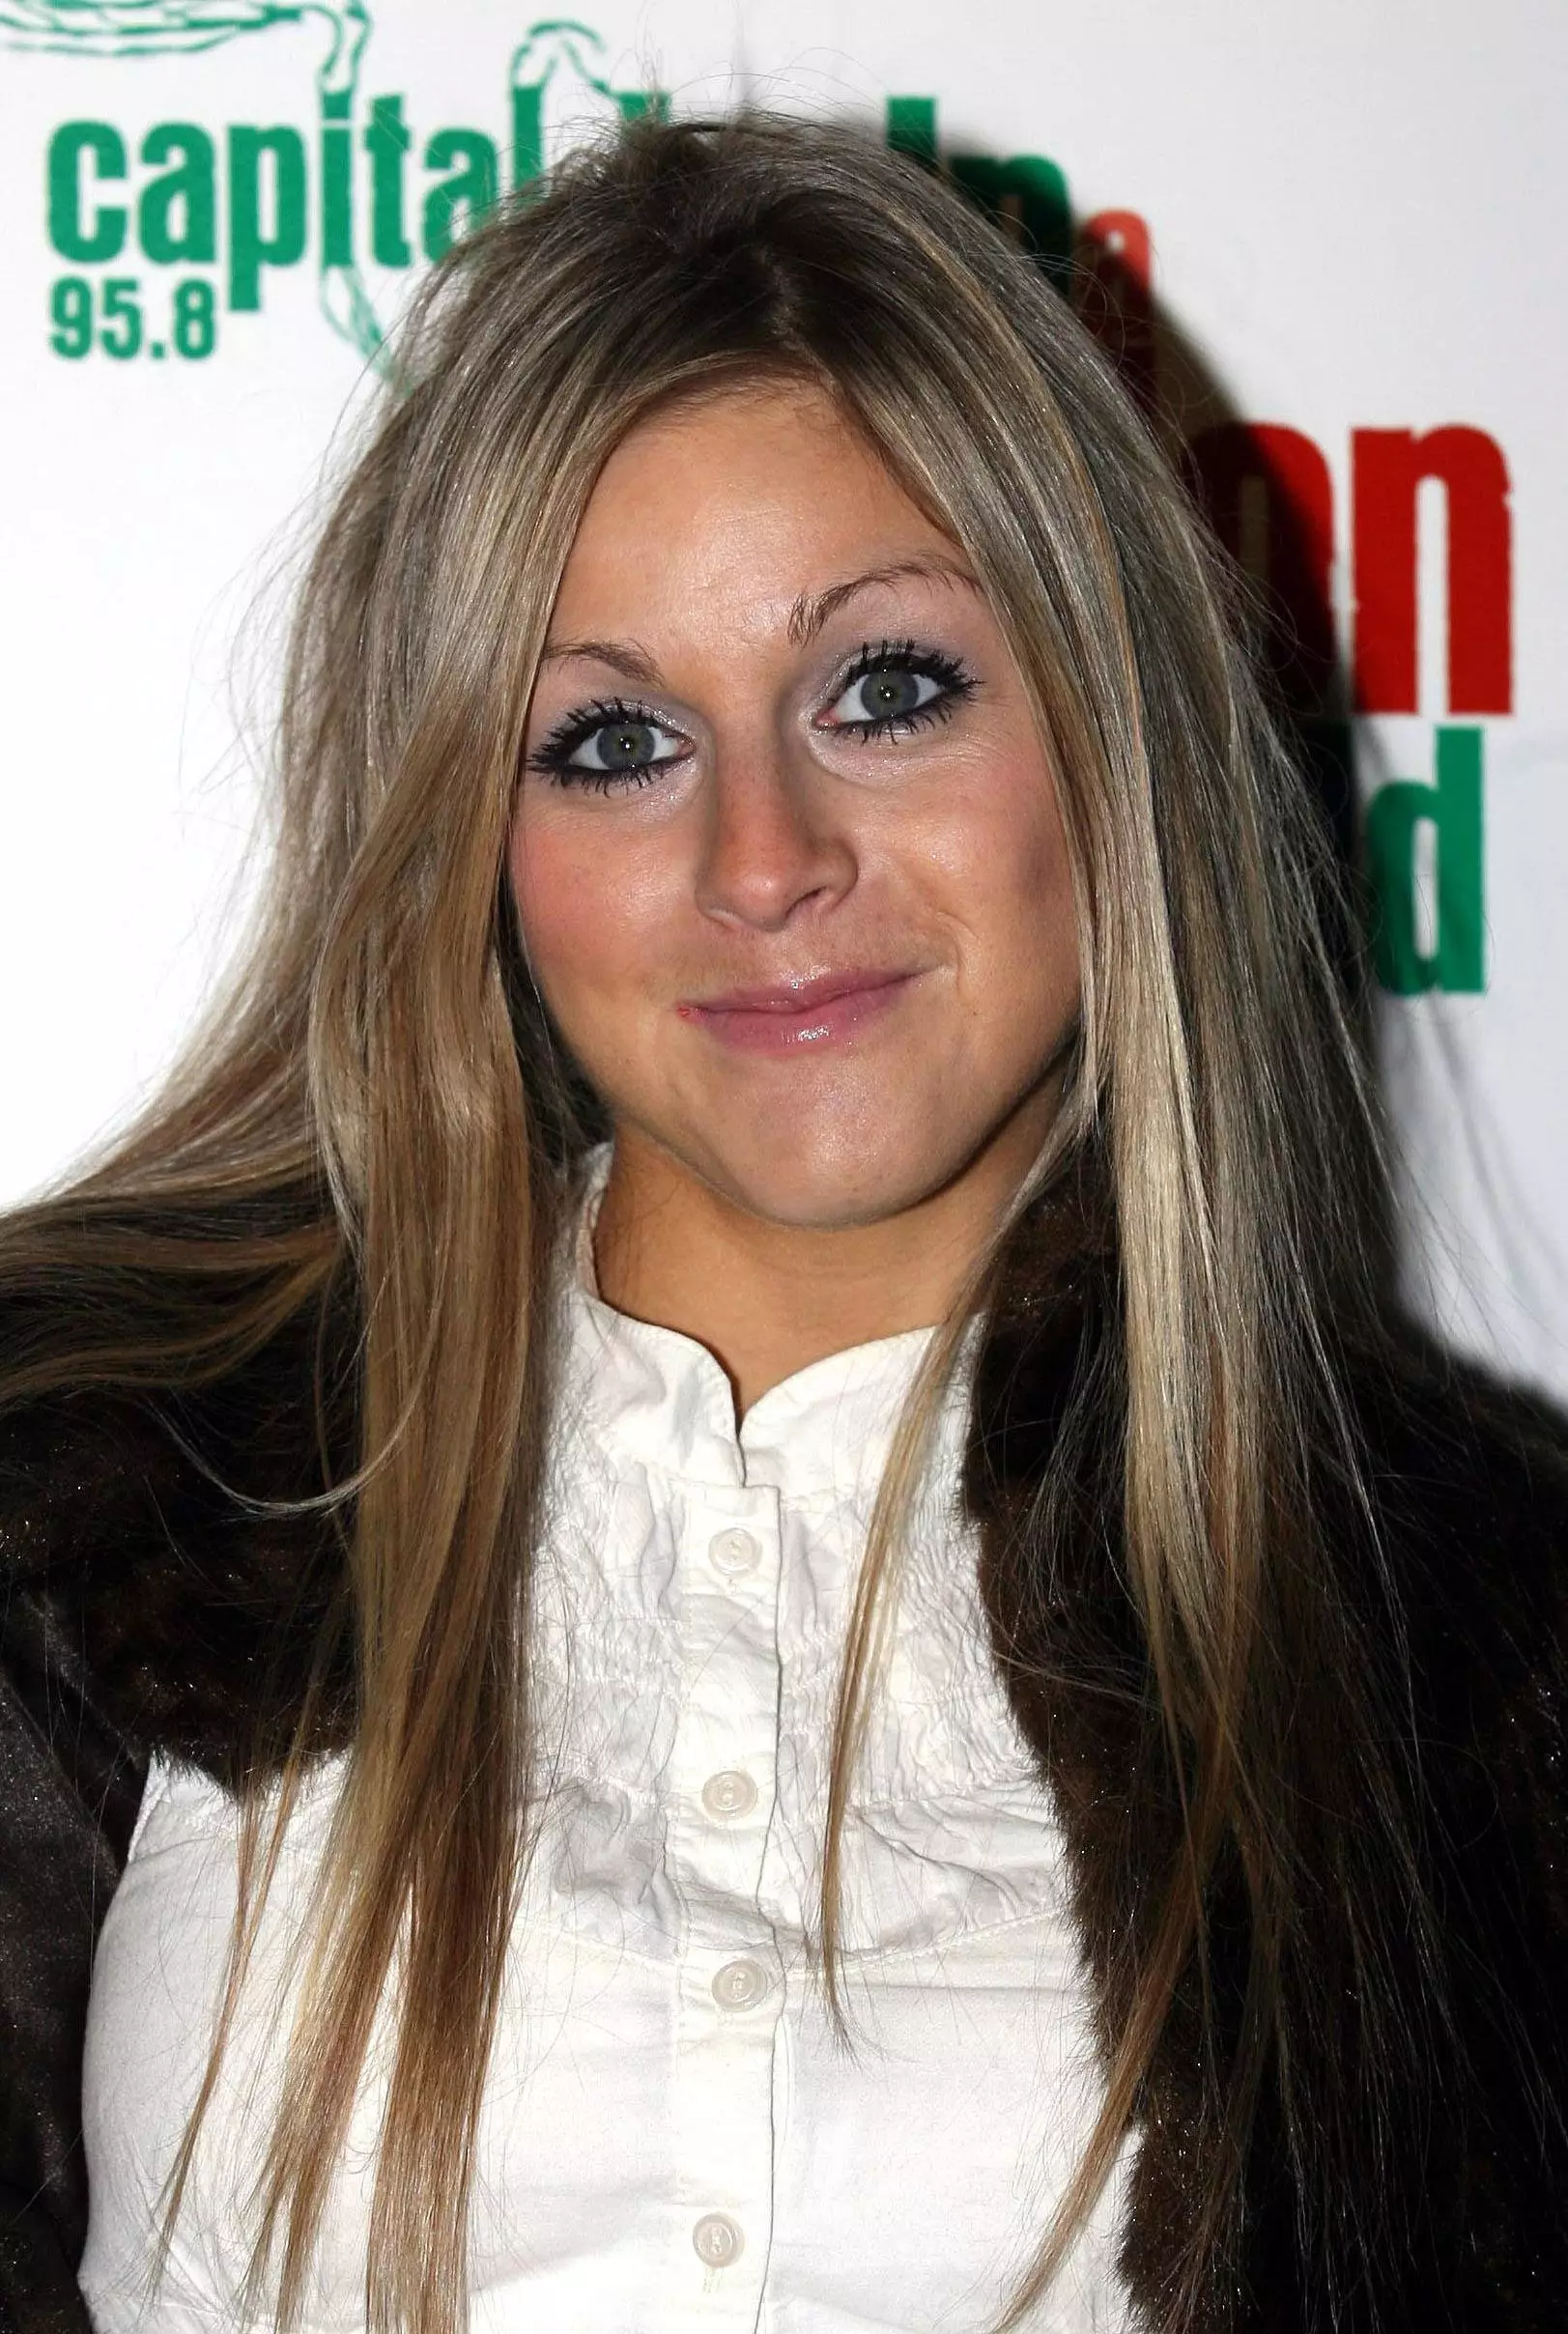 Nikki Grahame sadly passed away earlier this month (